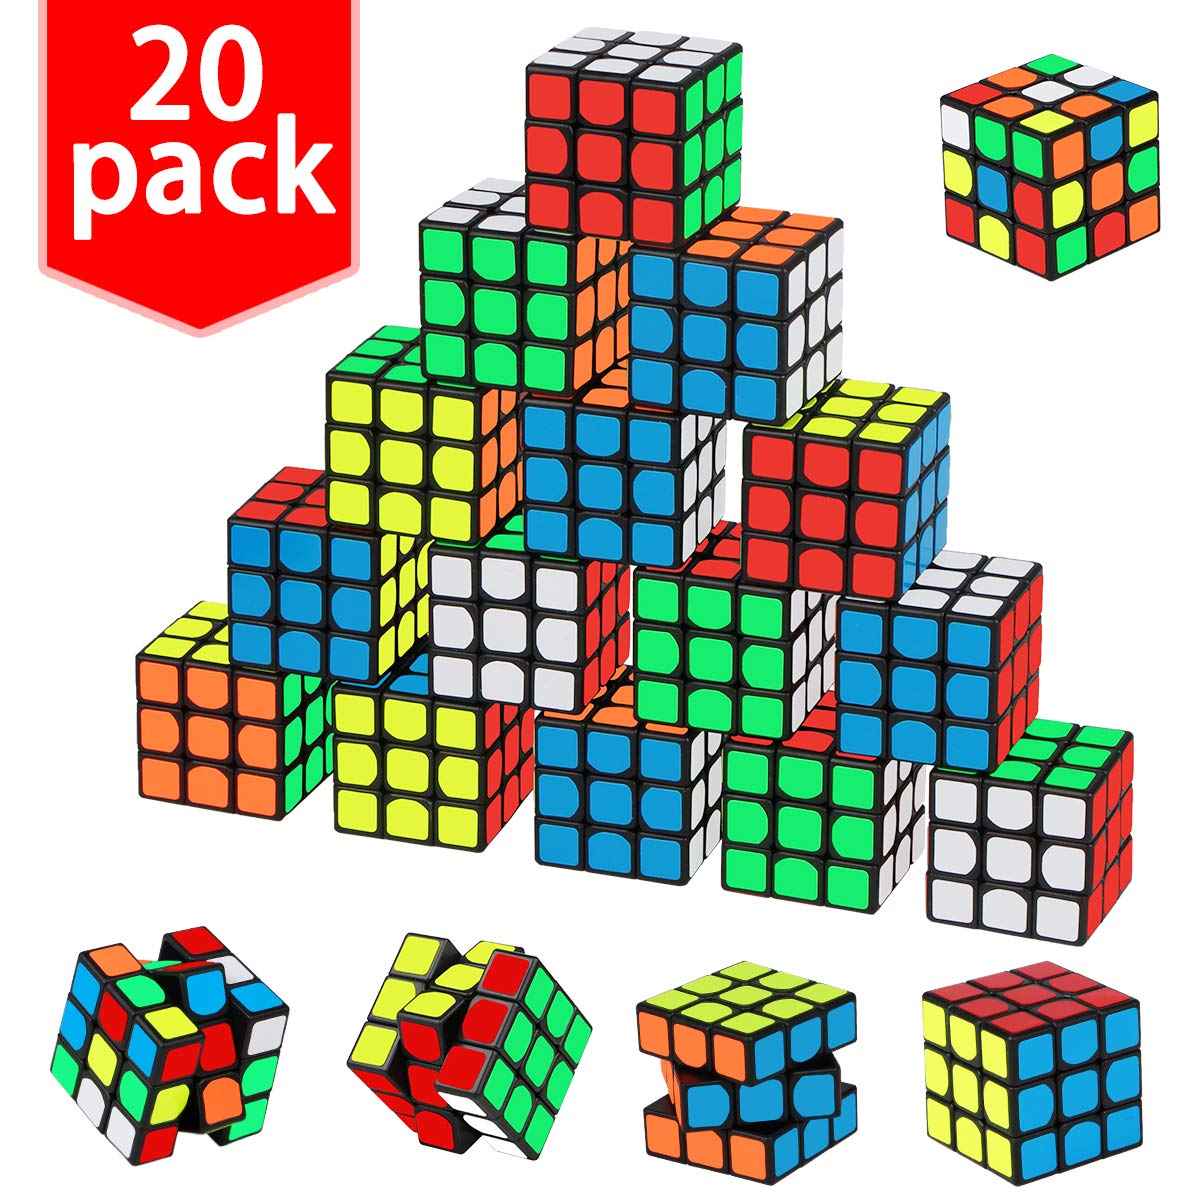 Mini Cube Puzzle Party Favors for Kids, Libay 20 Pack Magic Cube Party Puzzle Game Toys Classroom Rewards and School Prize for Students, Stress Relief Toys Giveaway Goody Bag Filler Birthday Gift